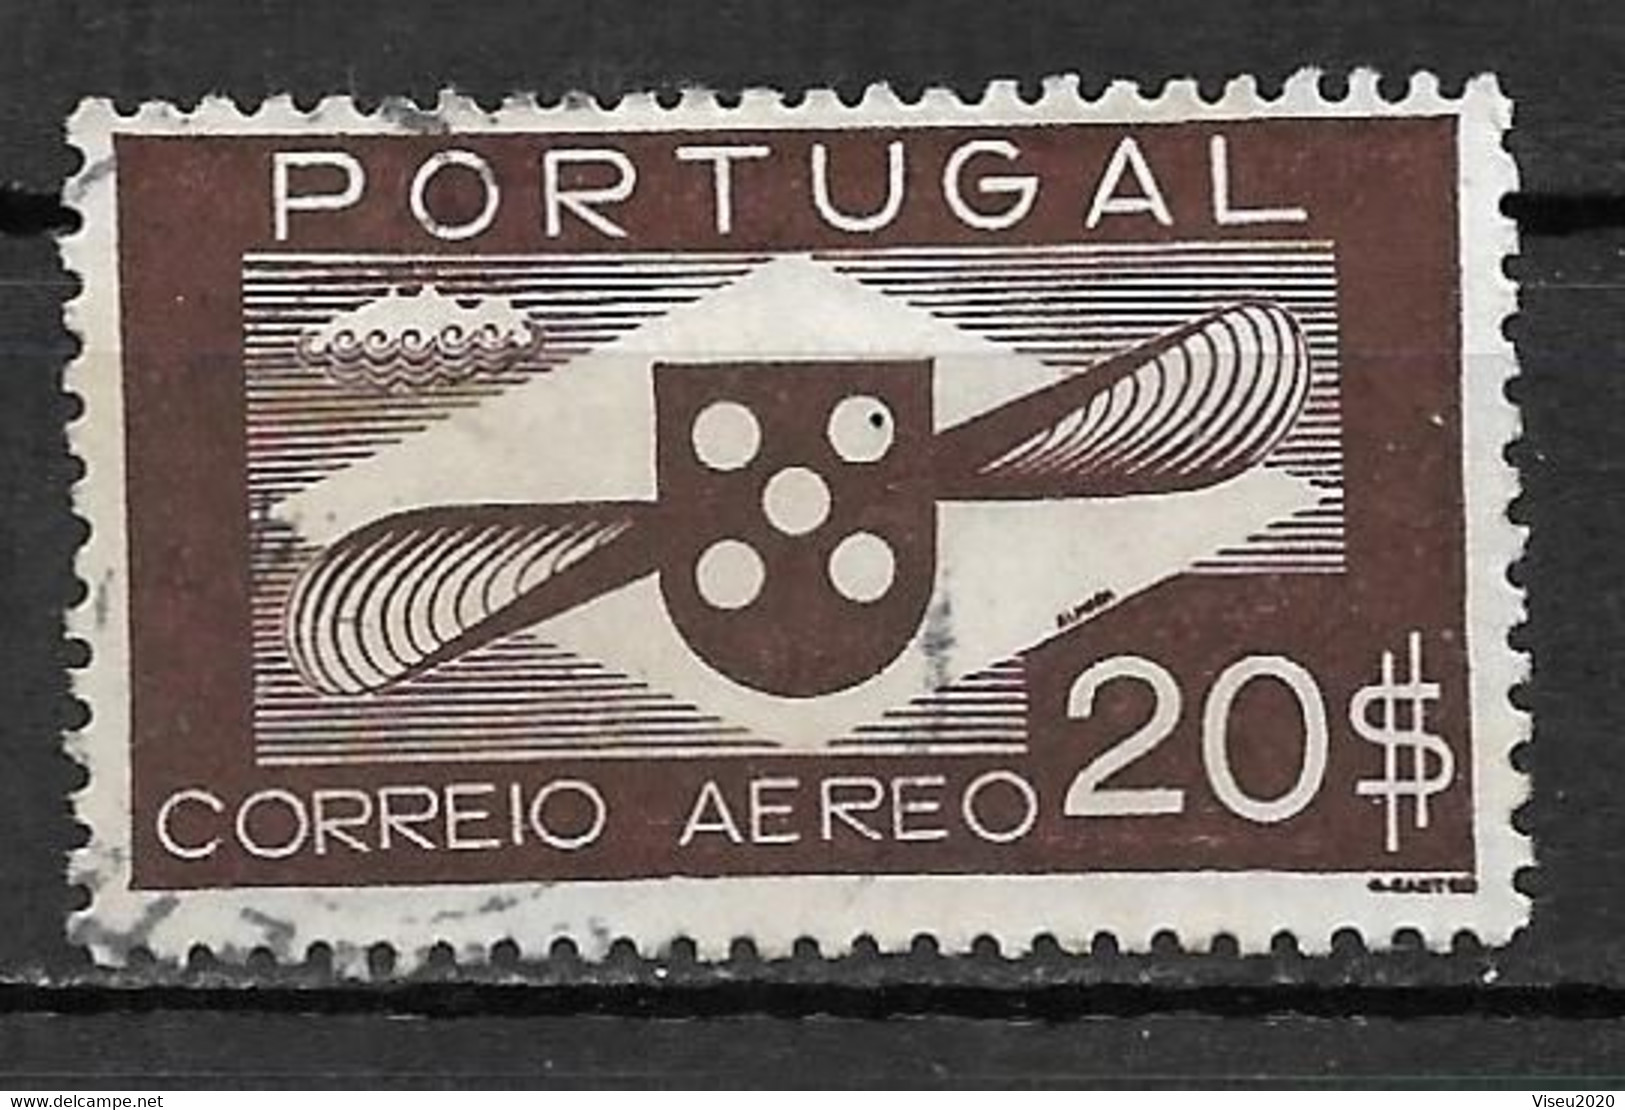 Portugal 1936 - Correio Aéreo - Hélice - Afinsa 09 - Used Stamps